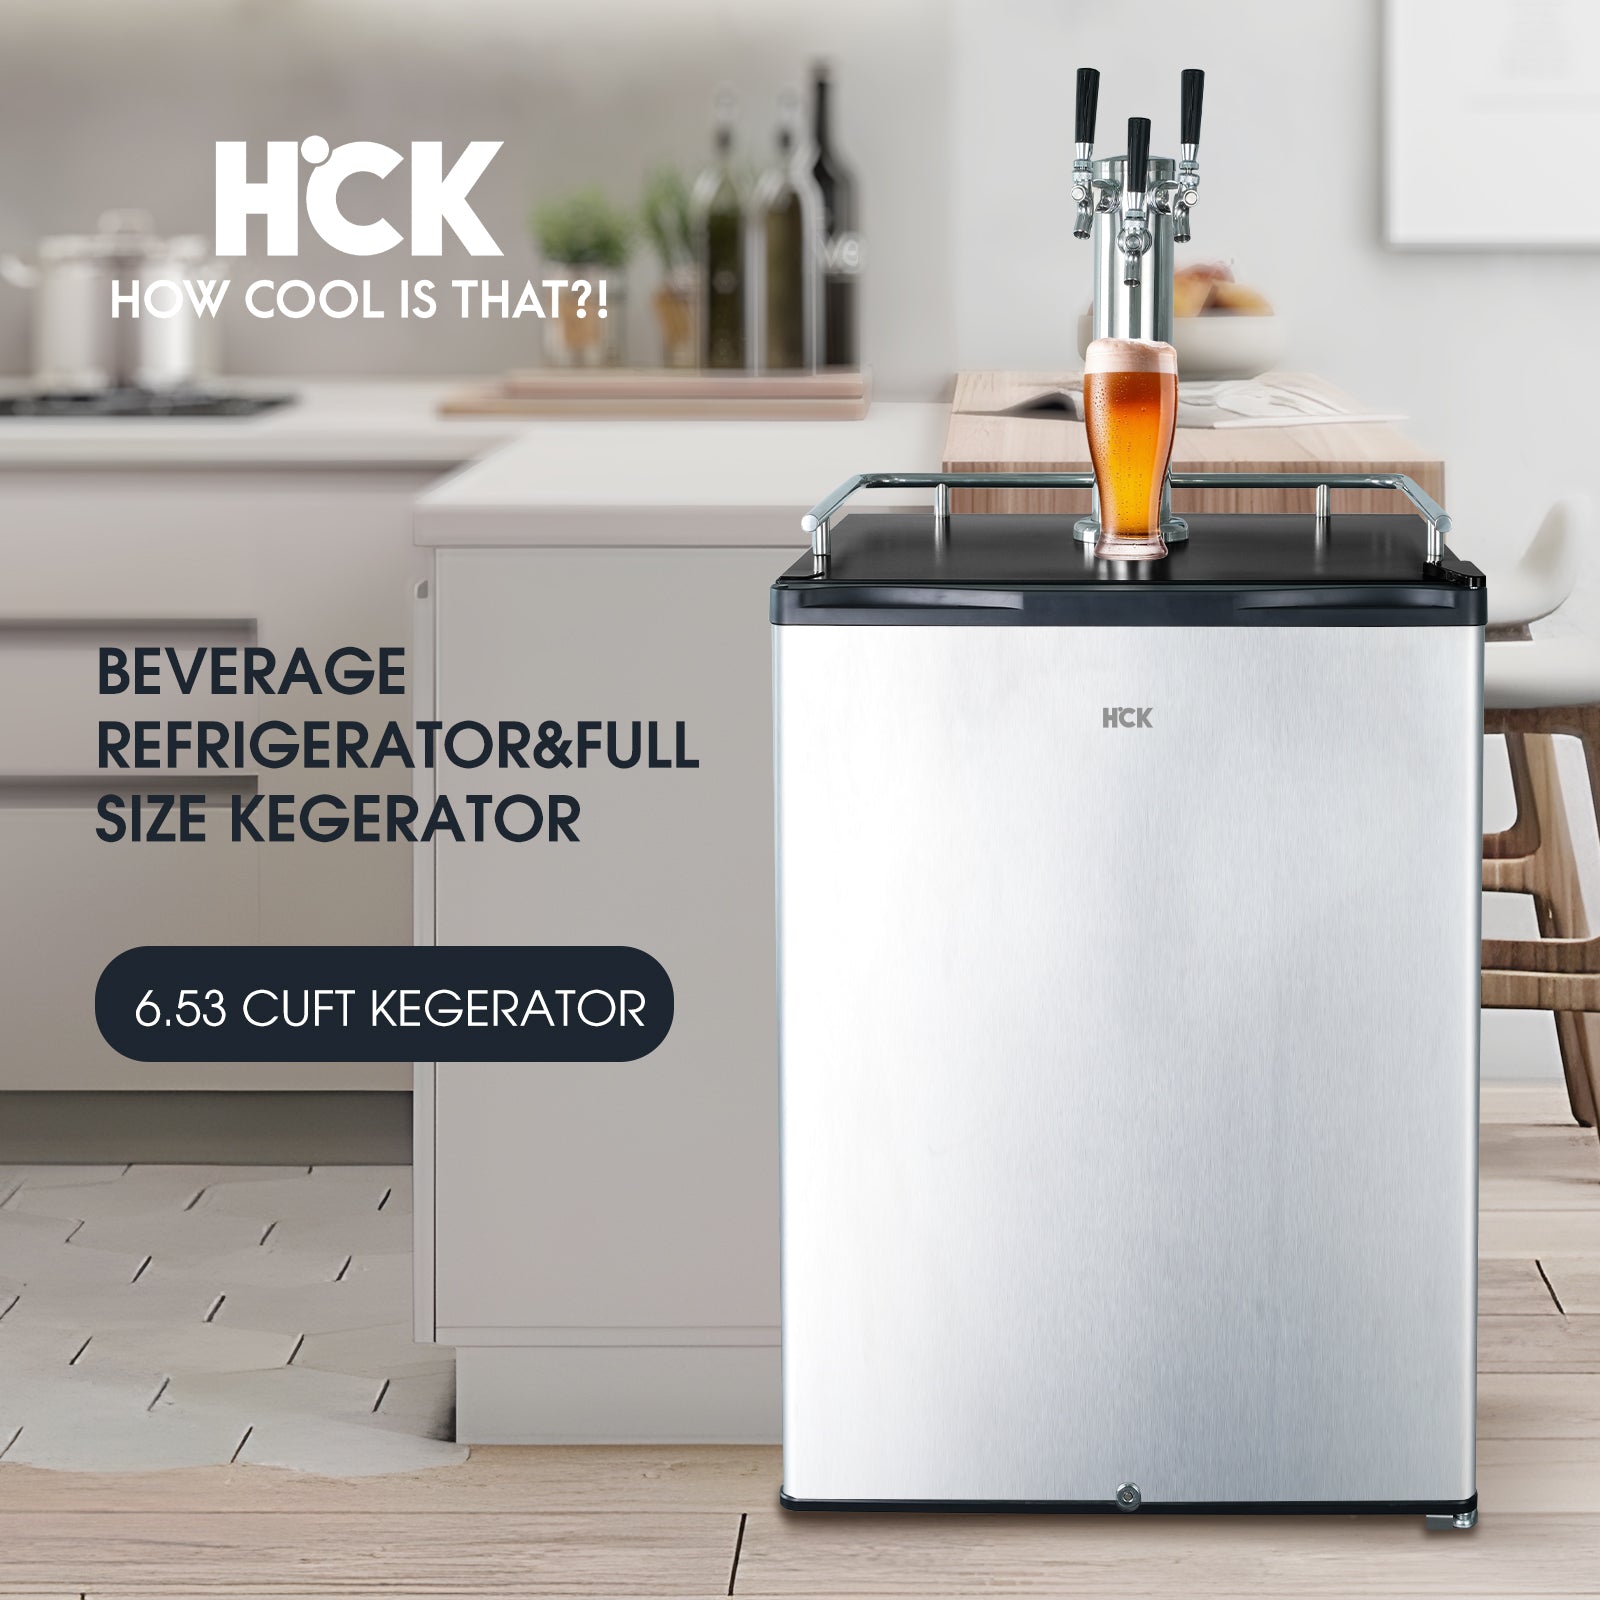 Front view of a 6.53 Cu Ft Stainless Steel Outdoor Kegerator Refrigerator with a capacity of 230 cans, installed in a kitchen setup, accompanied by a description highlighting the product's name and features